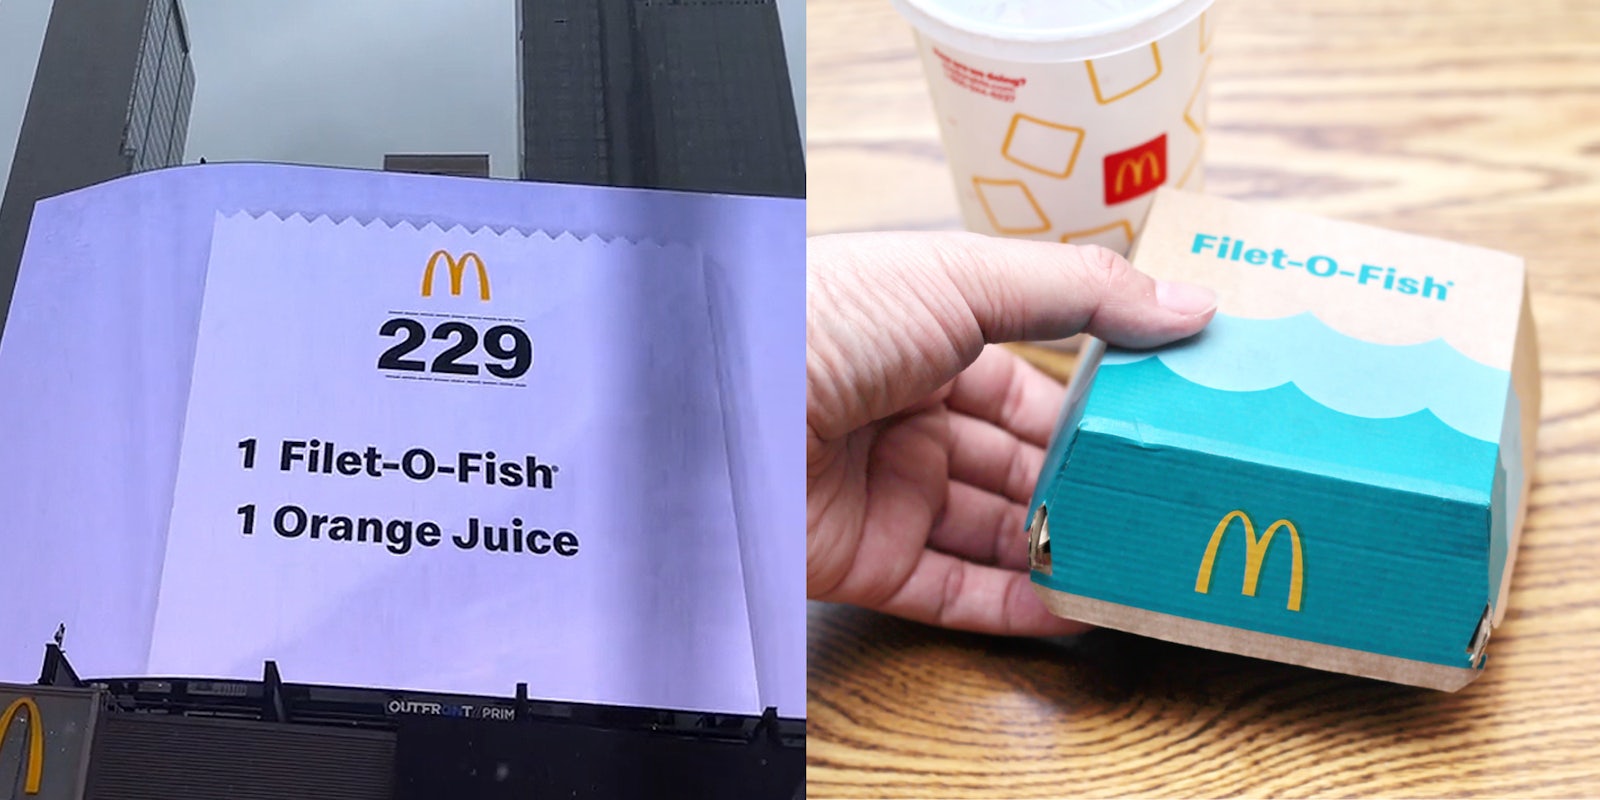 McDonald's order displayed on large outdoor screen '1 Filet-O-Fish 1 Orange Juice' (l) hand holding McDonald's Filet-O-Fish with drink next to it on wooden surface (r)